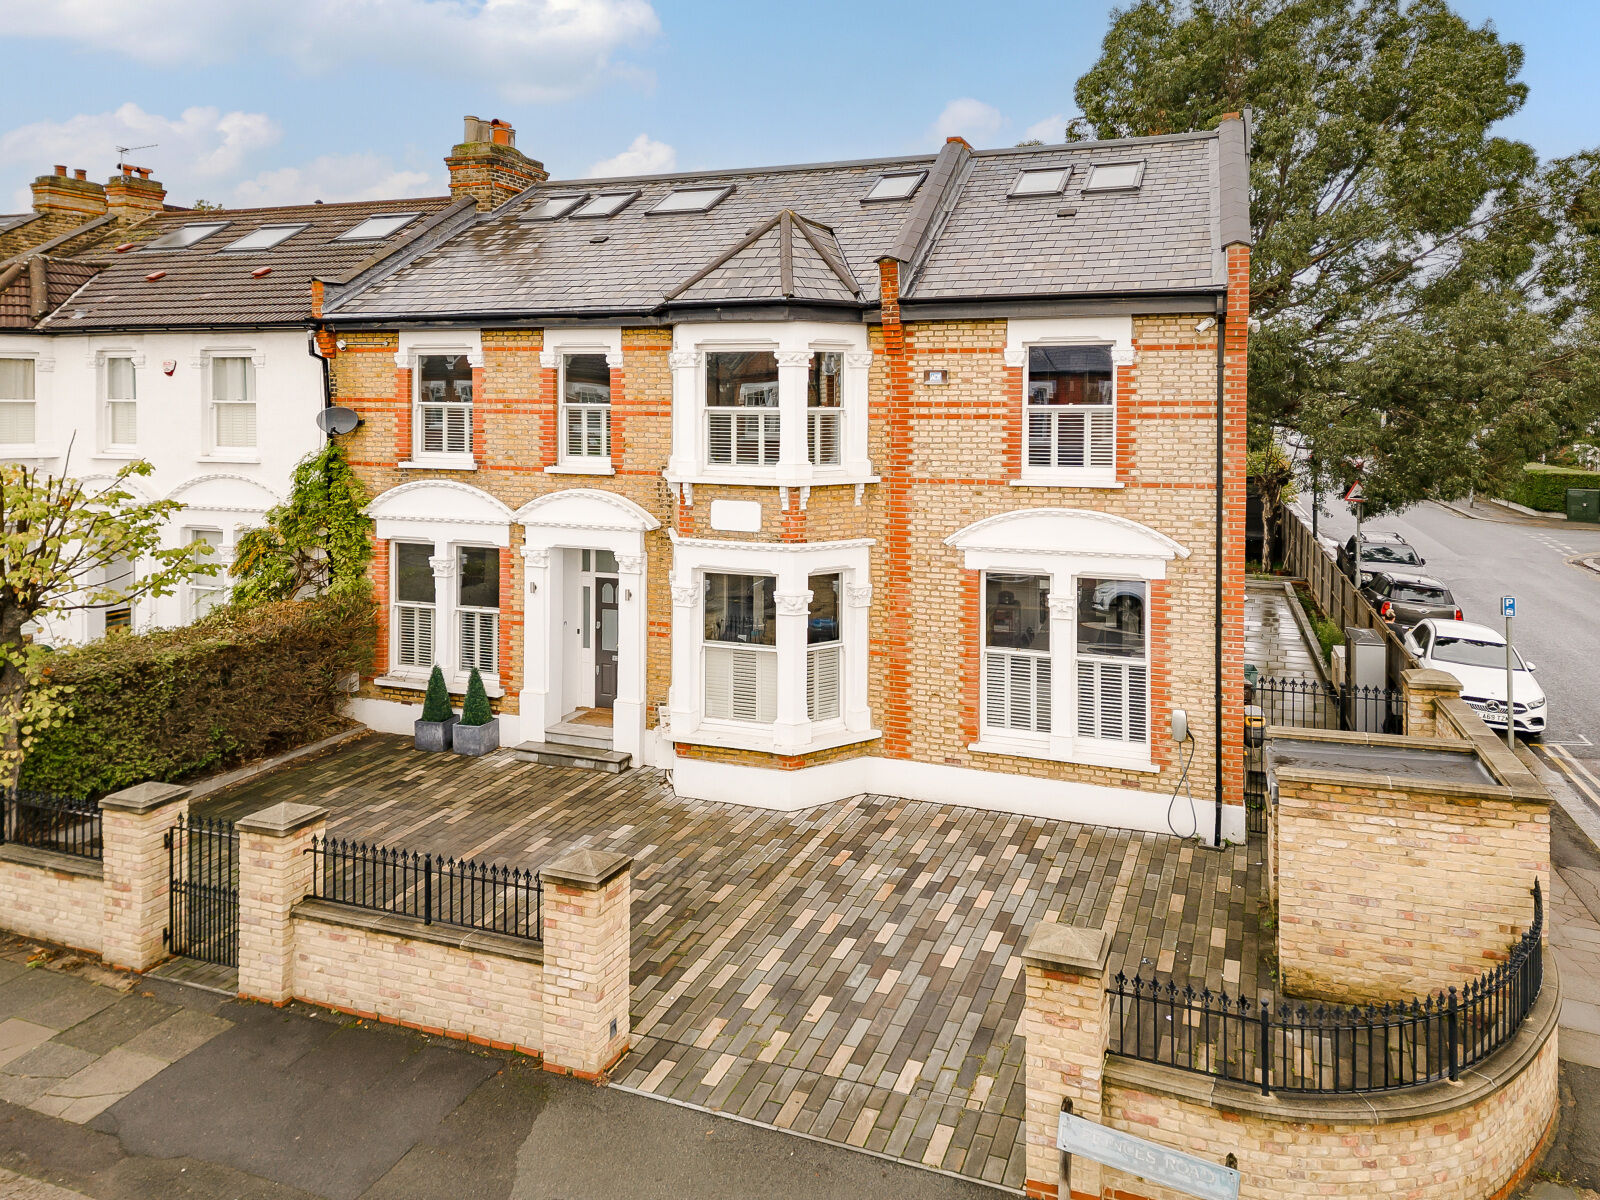 5 bedroom semi detached house to rent, Available now Princes Road, Wimbledon, SW19, main image